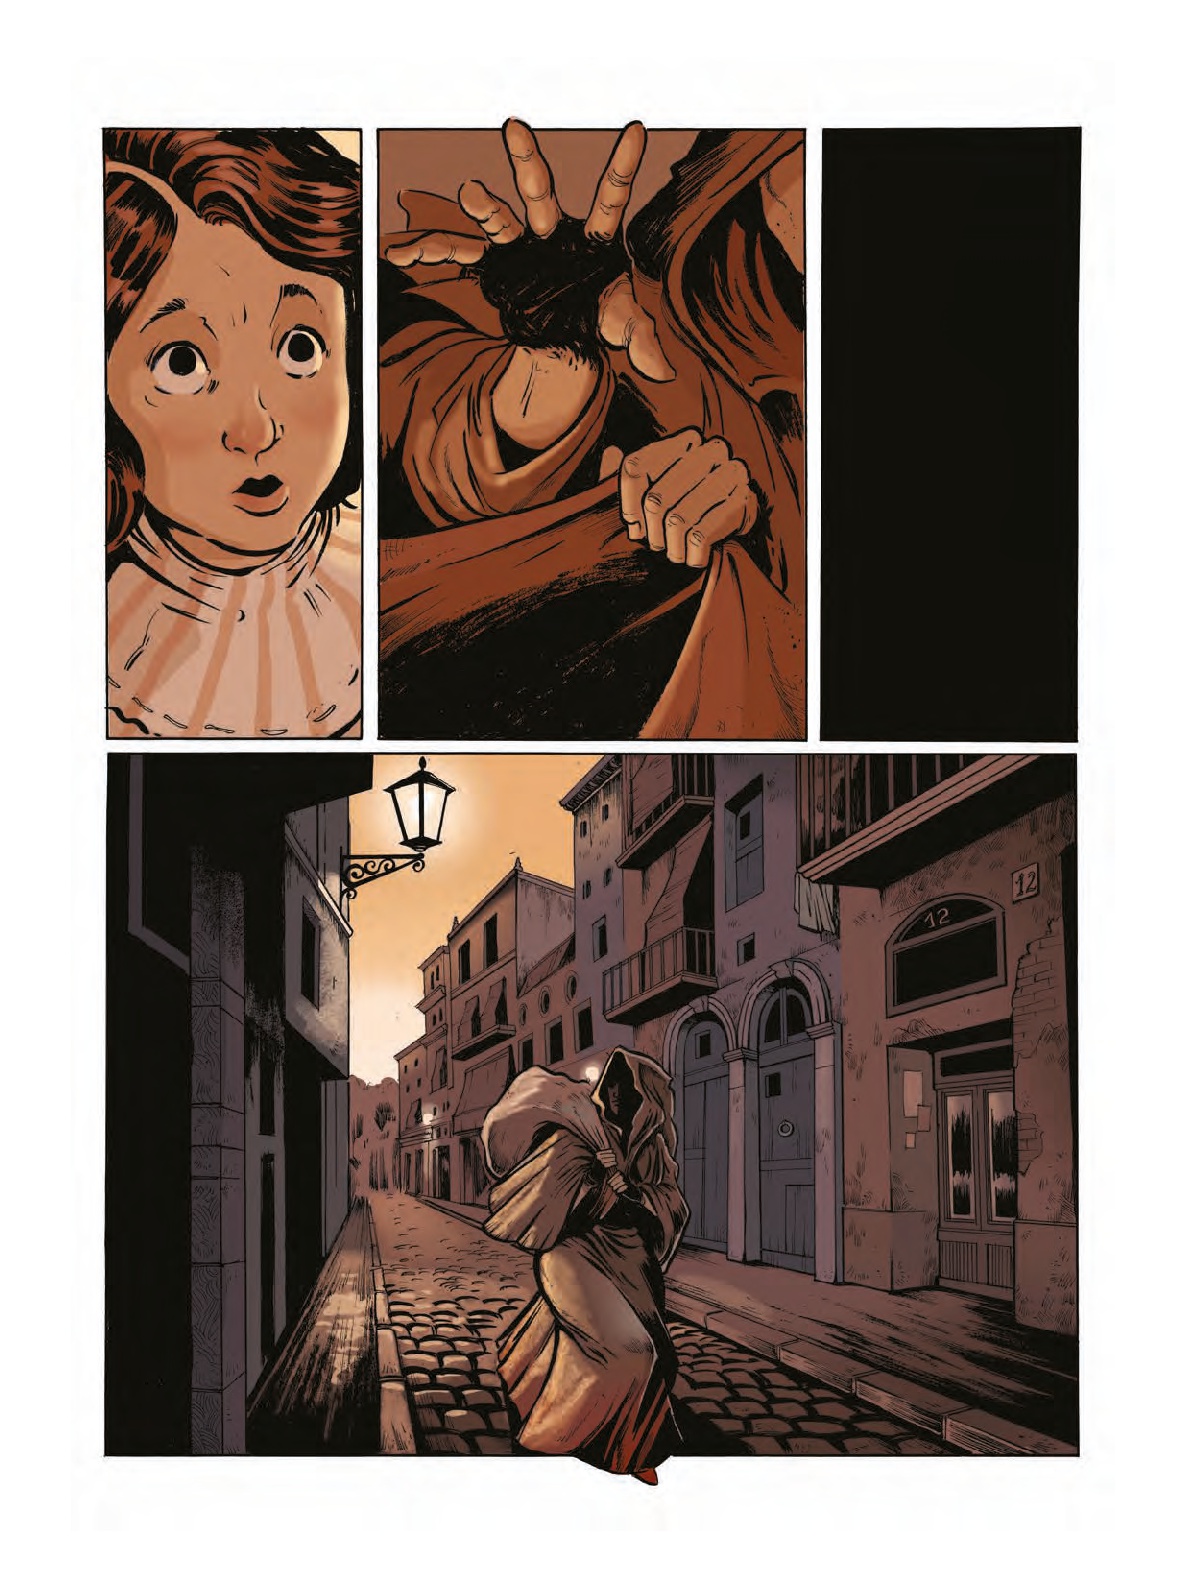 A page of the graphic novel (by Norma Editorial)